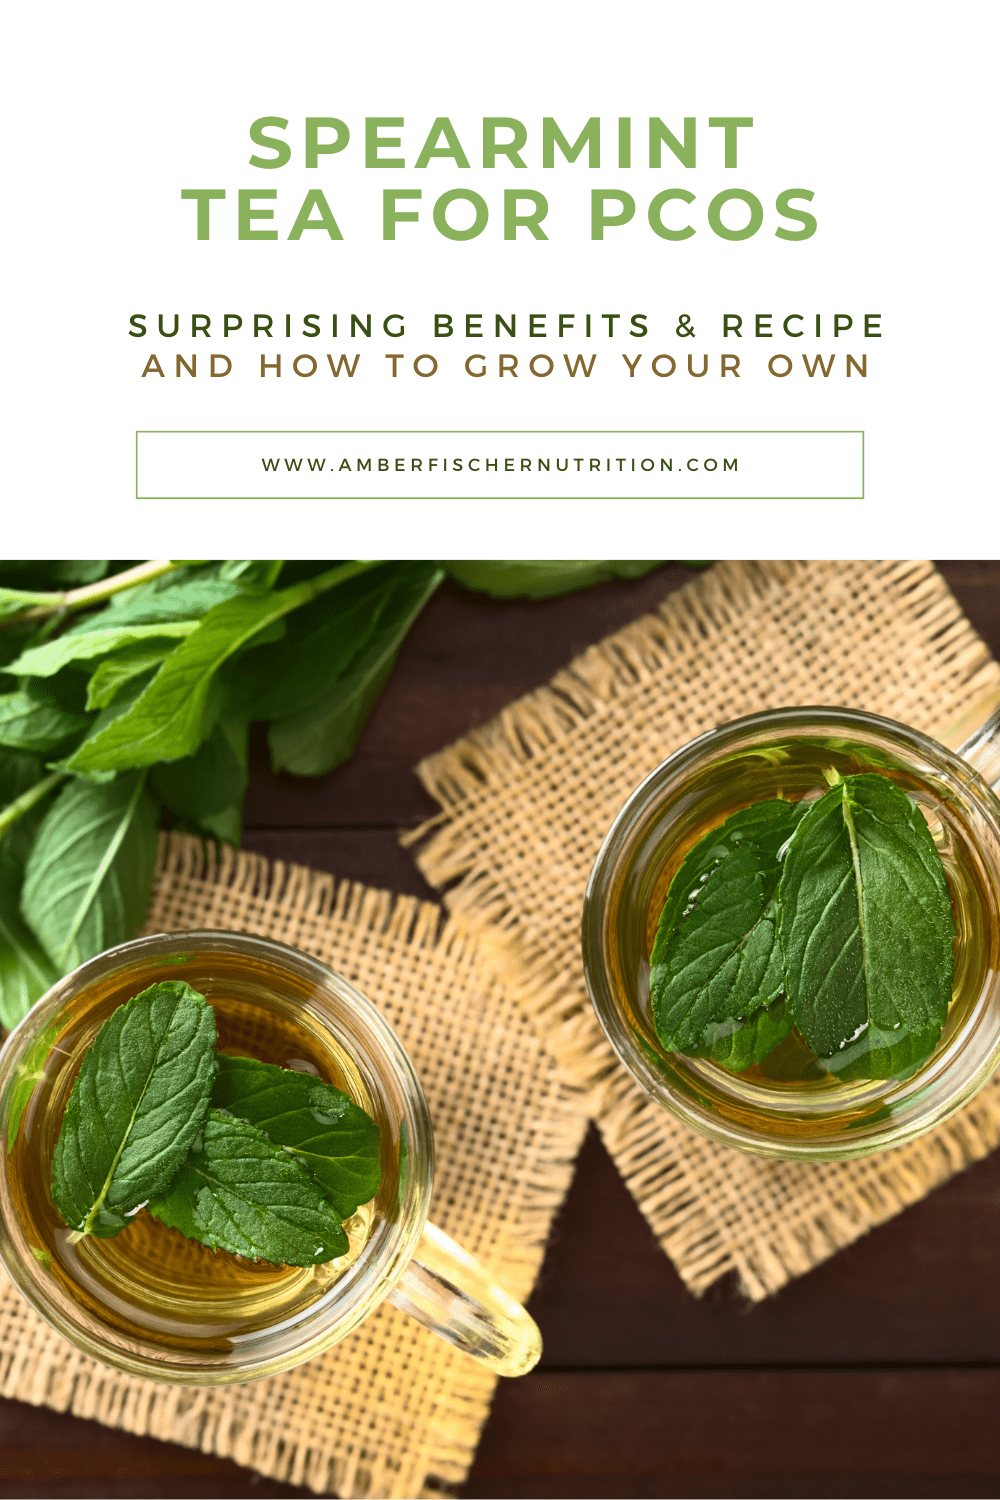 spearmint tea for pcos benefits and recipe graphic